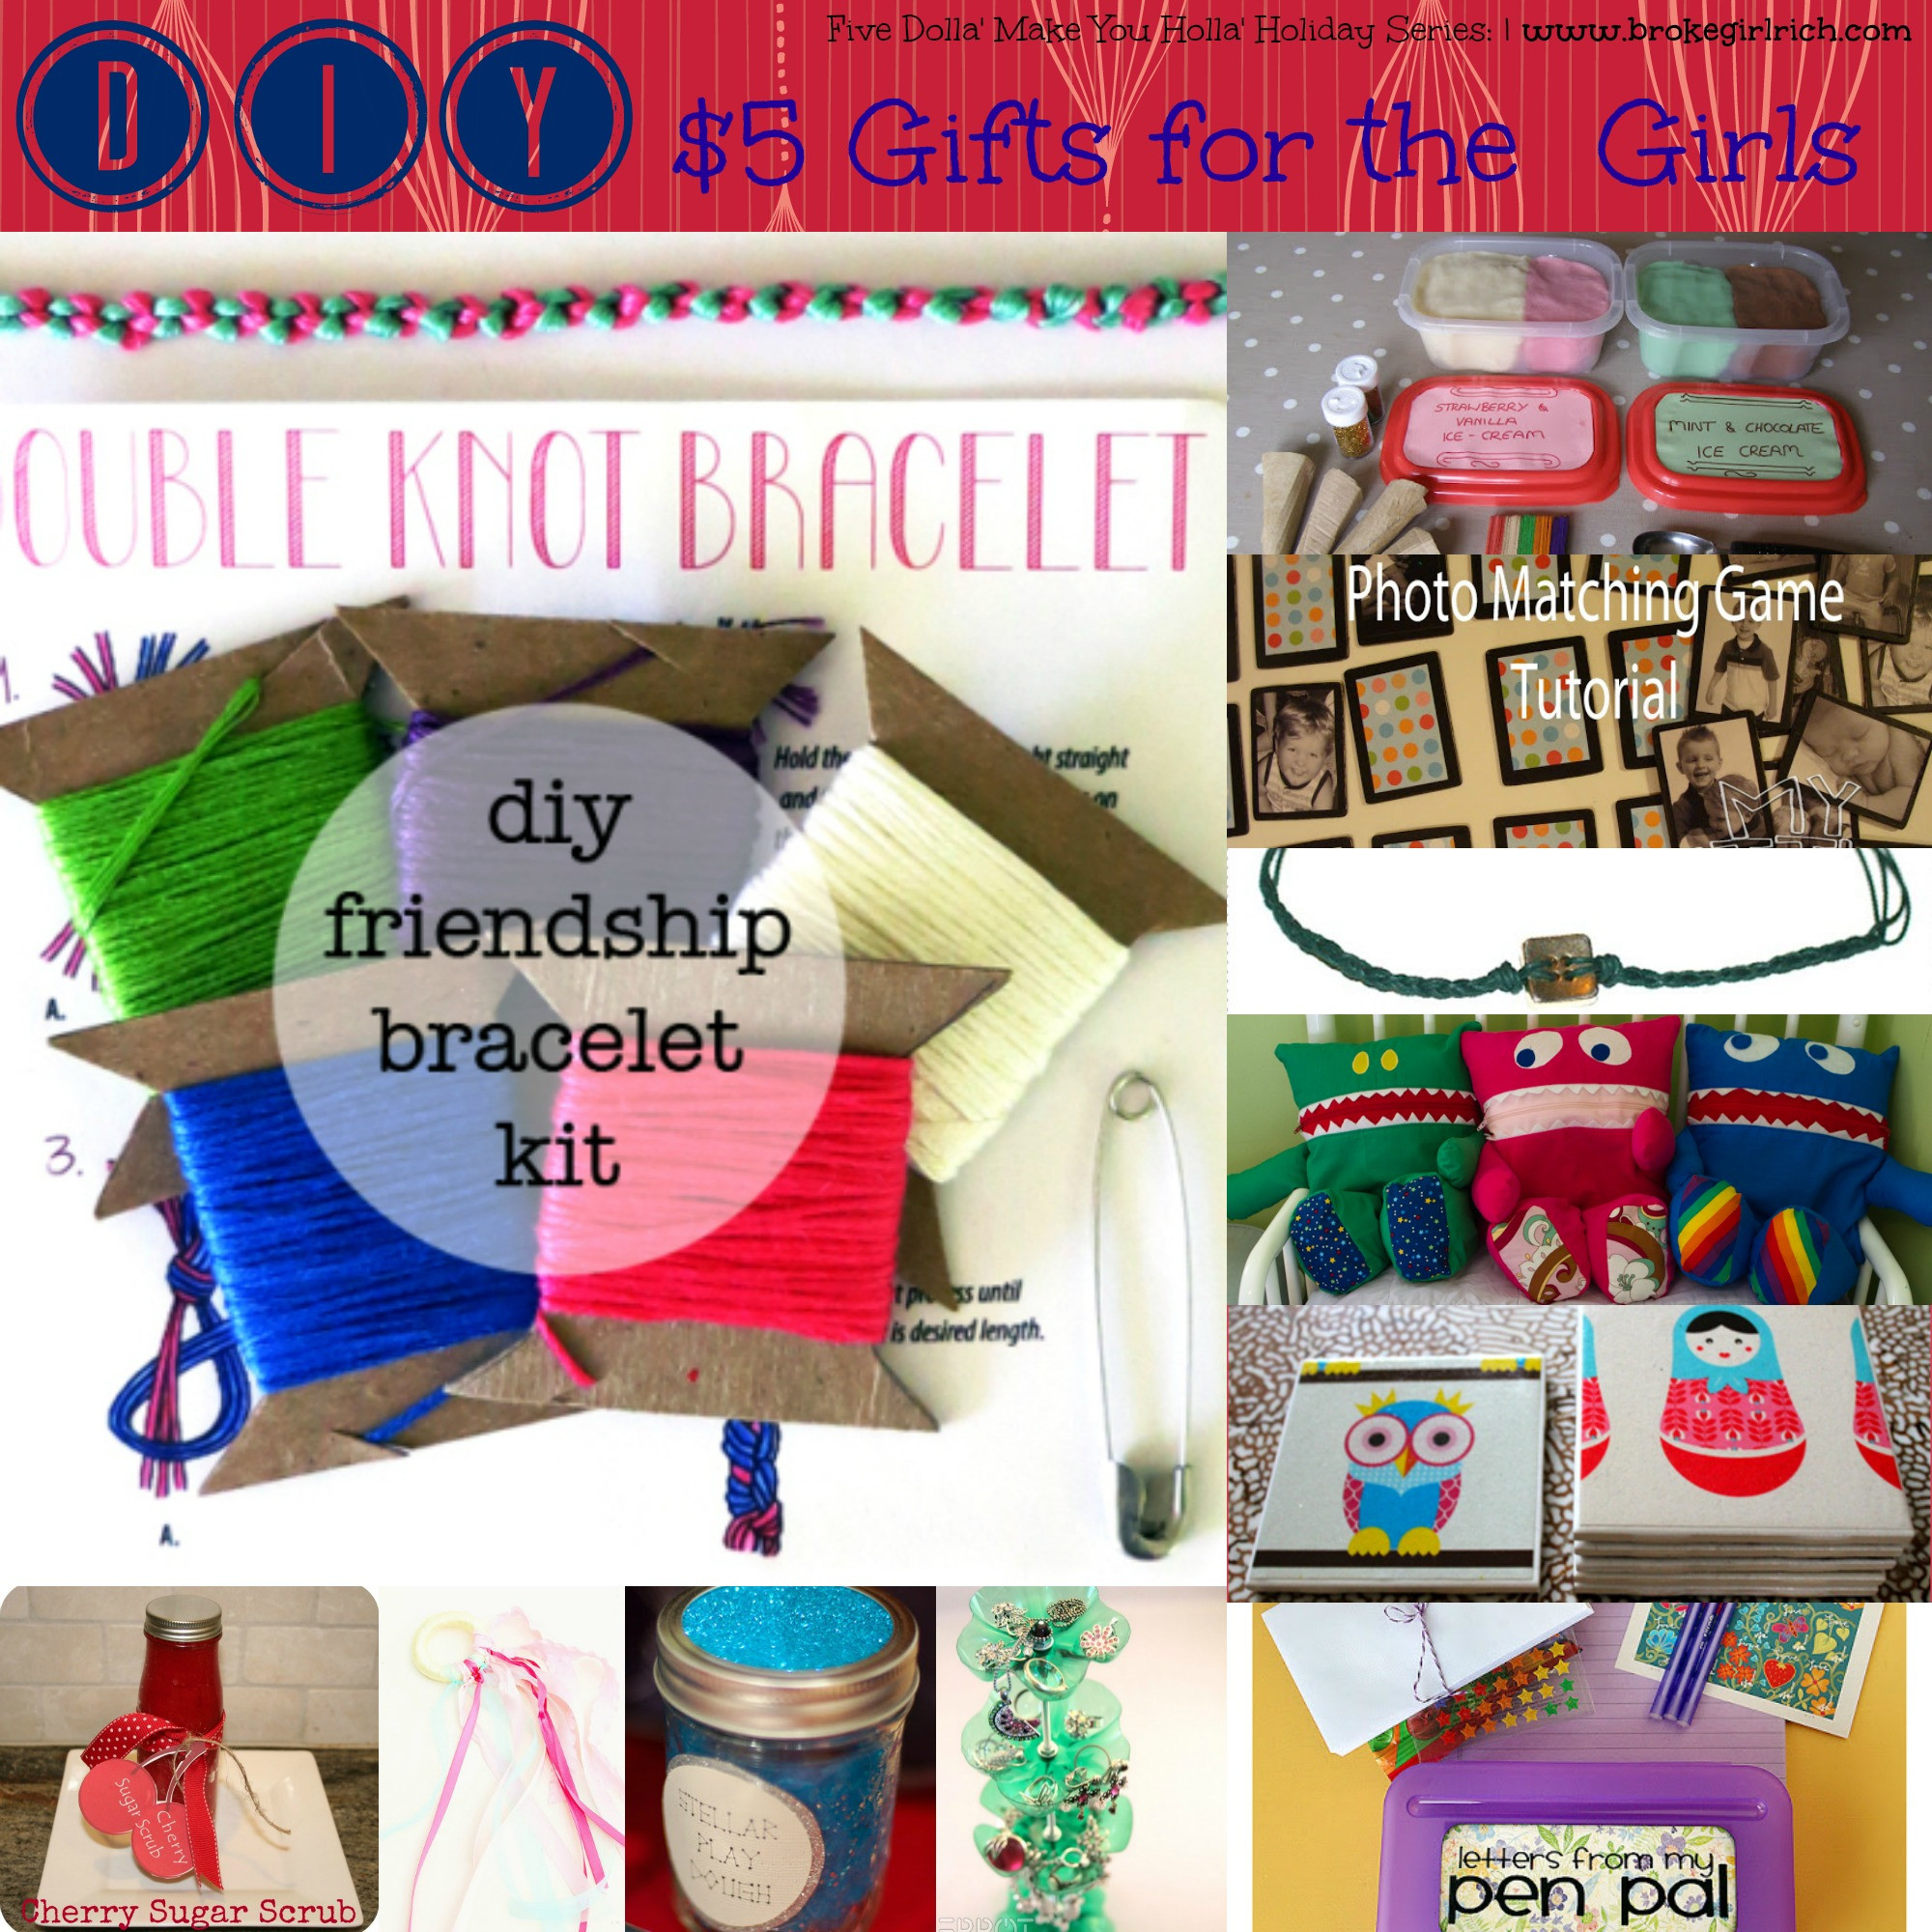 DIY Gifts For Girls
 Five Dolla Make You Holla Holiday Series Sisters